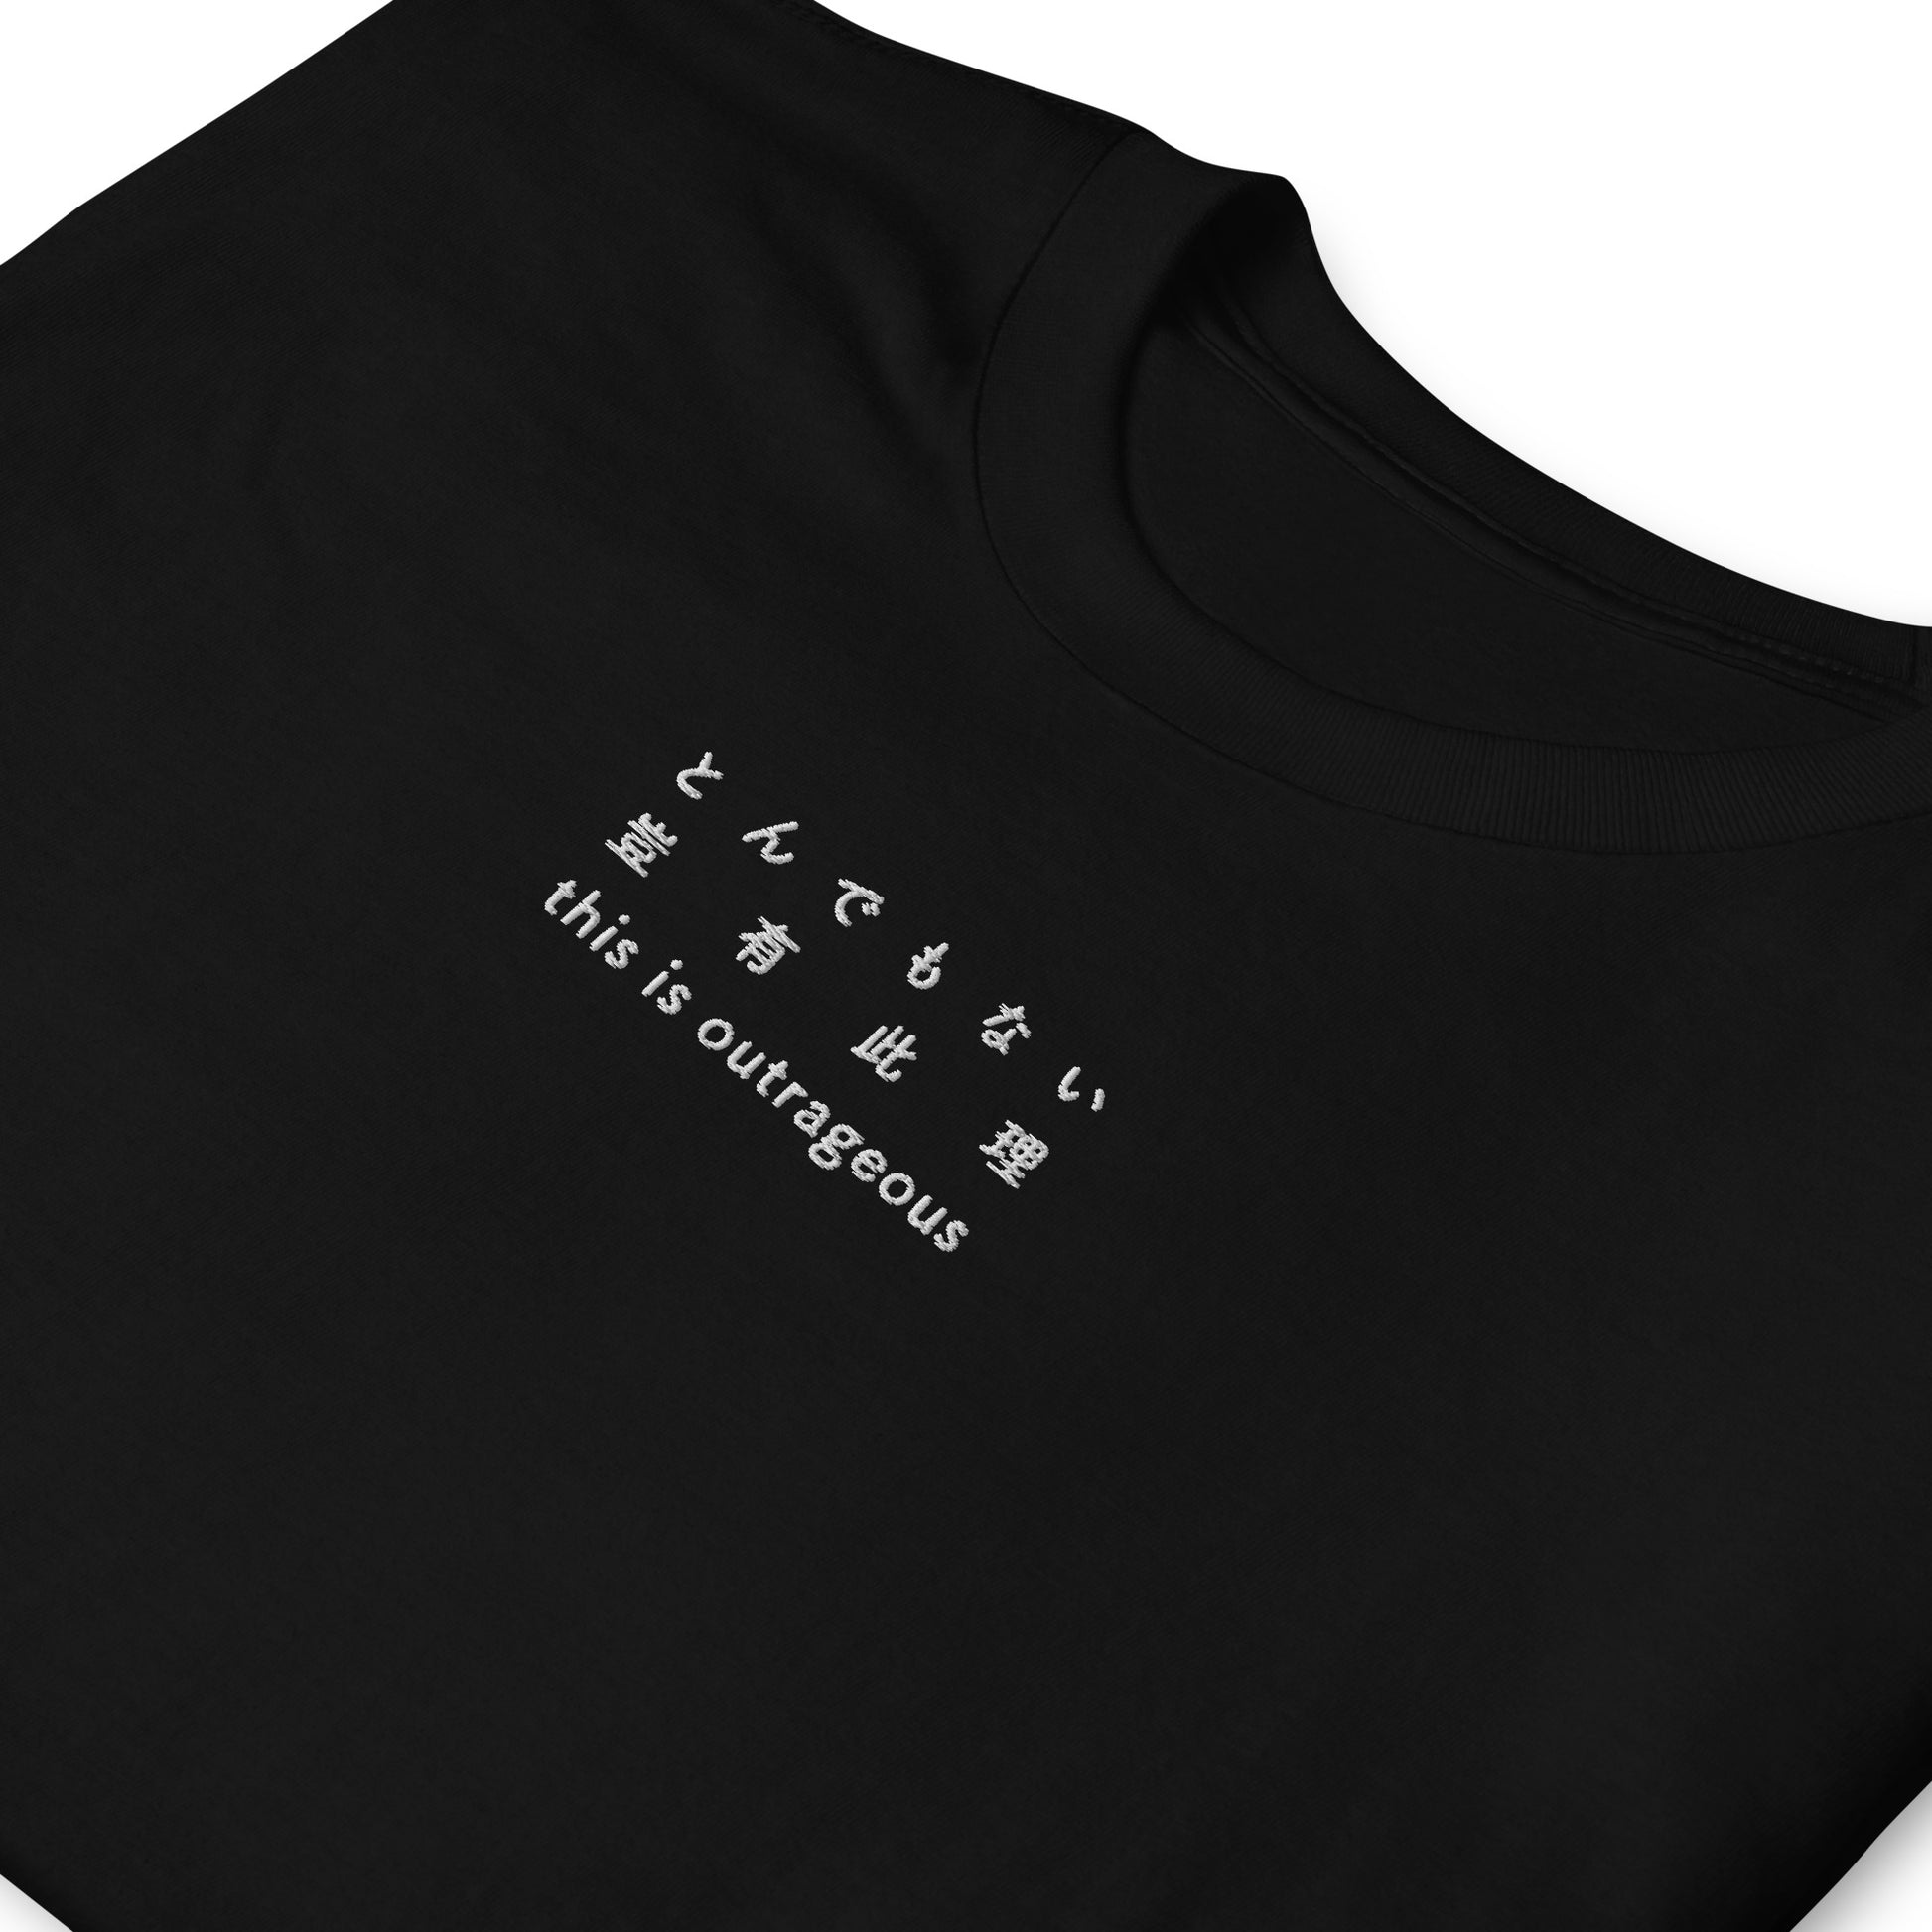 Black High Quality Tee - Front Design with an White Embroidery "This is Outrageous" in Japanese, Chinese and English